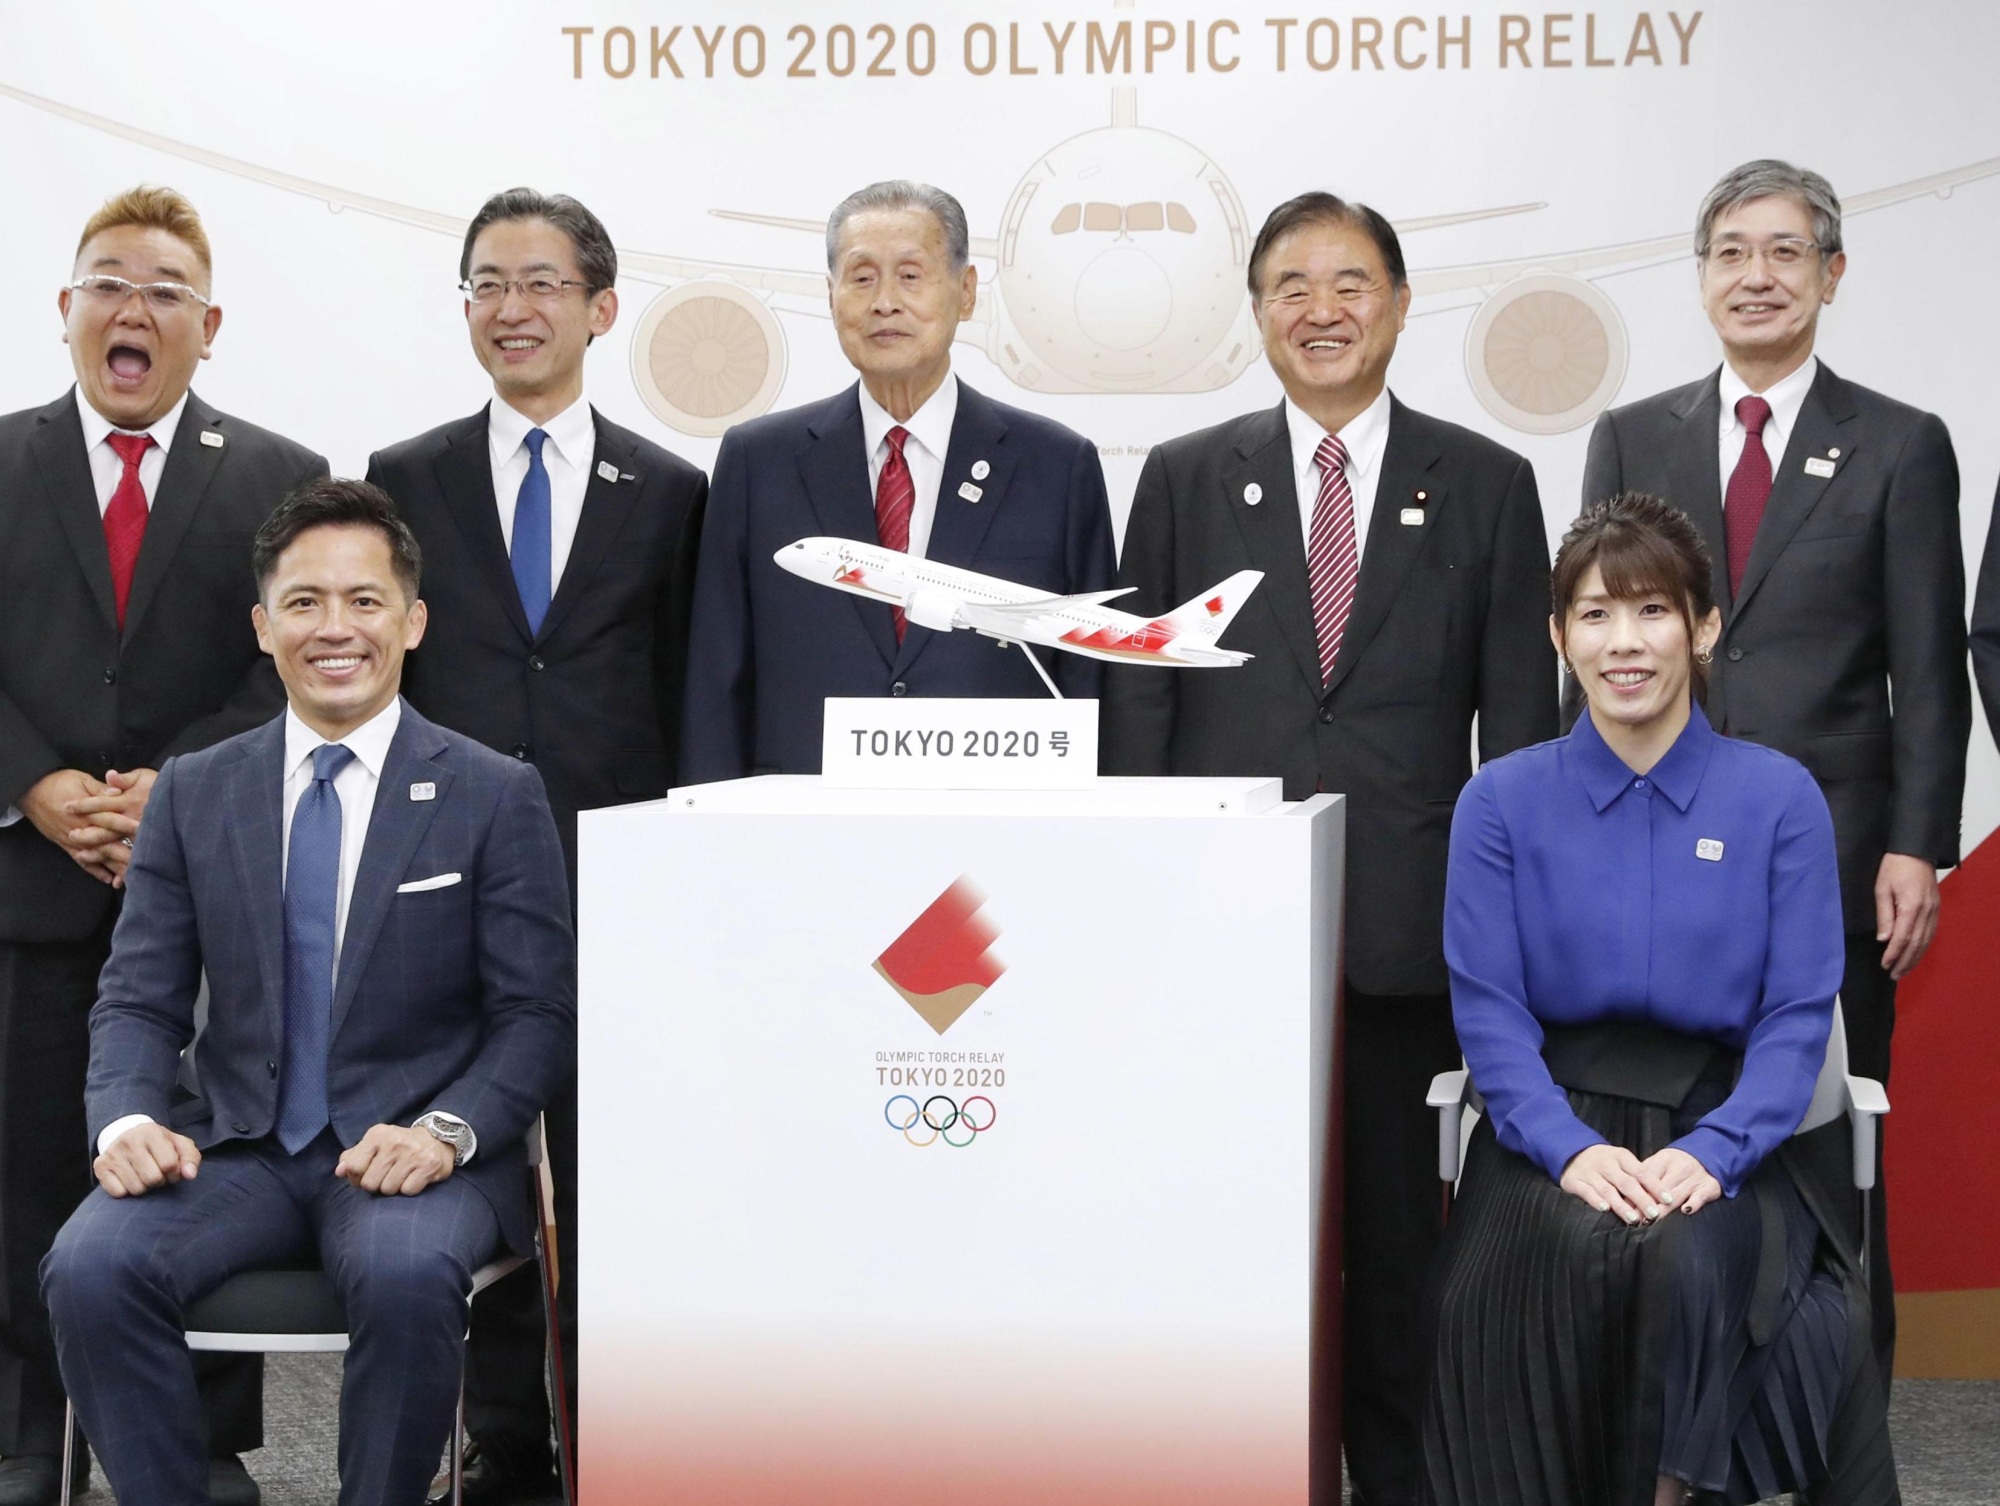 Tadahiro Nomura (first row, left) and Saori Yoshida (right) participate in a photo session along with Tokyo 2020 organizers and others on Friday in Tokyo. An overview of the Tokyo Olympic torch arrival ceremony was announced on the same day. | KYODO